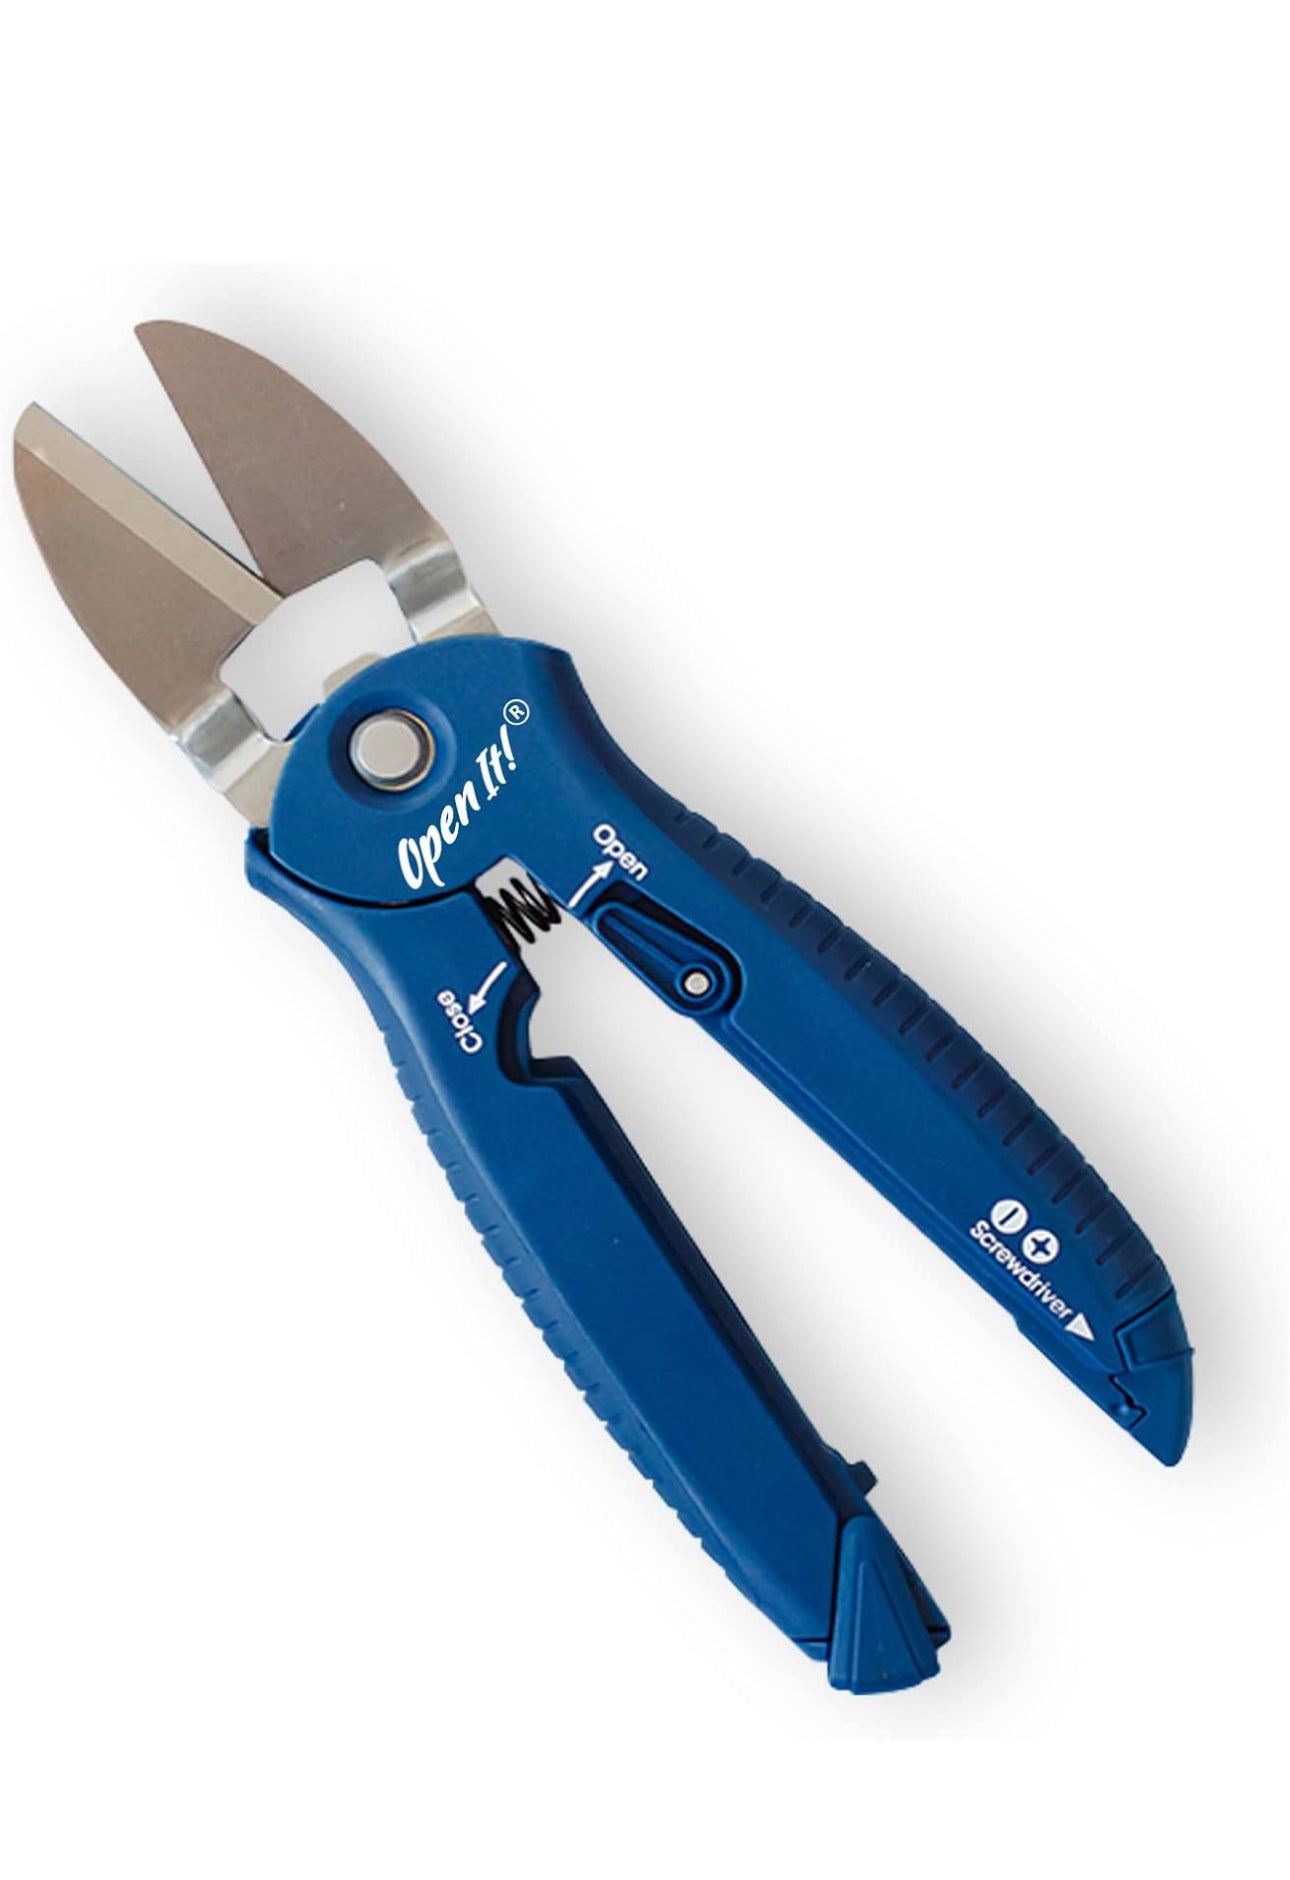 All-in-One Package Opener with Built-in Film Cutter & Strap Cutter